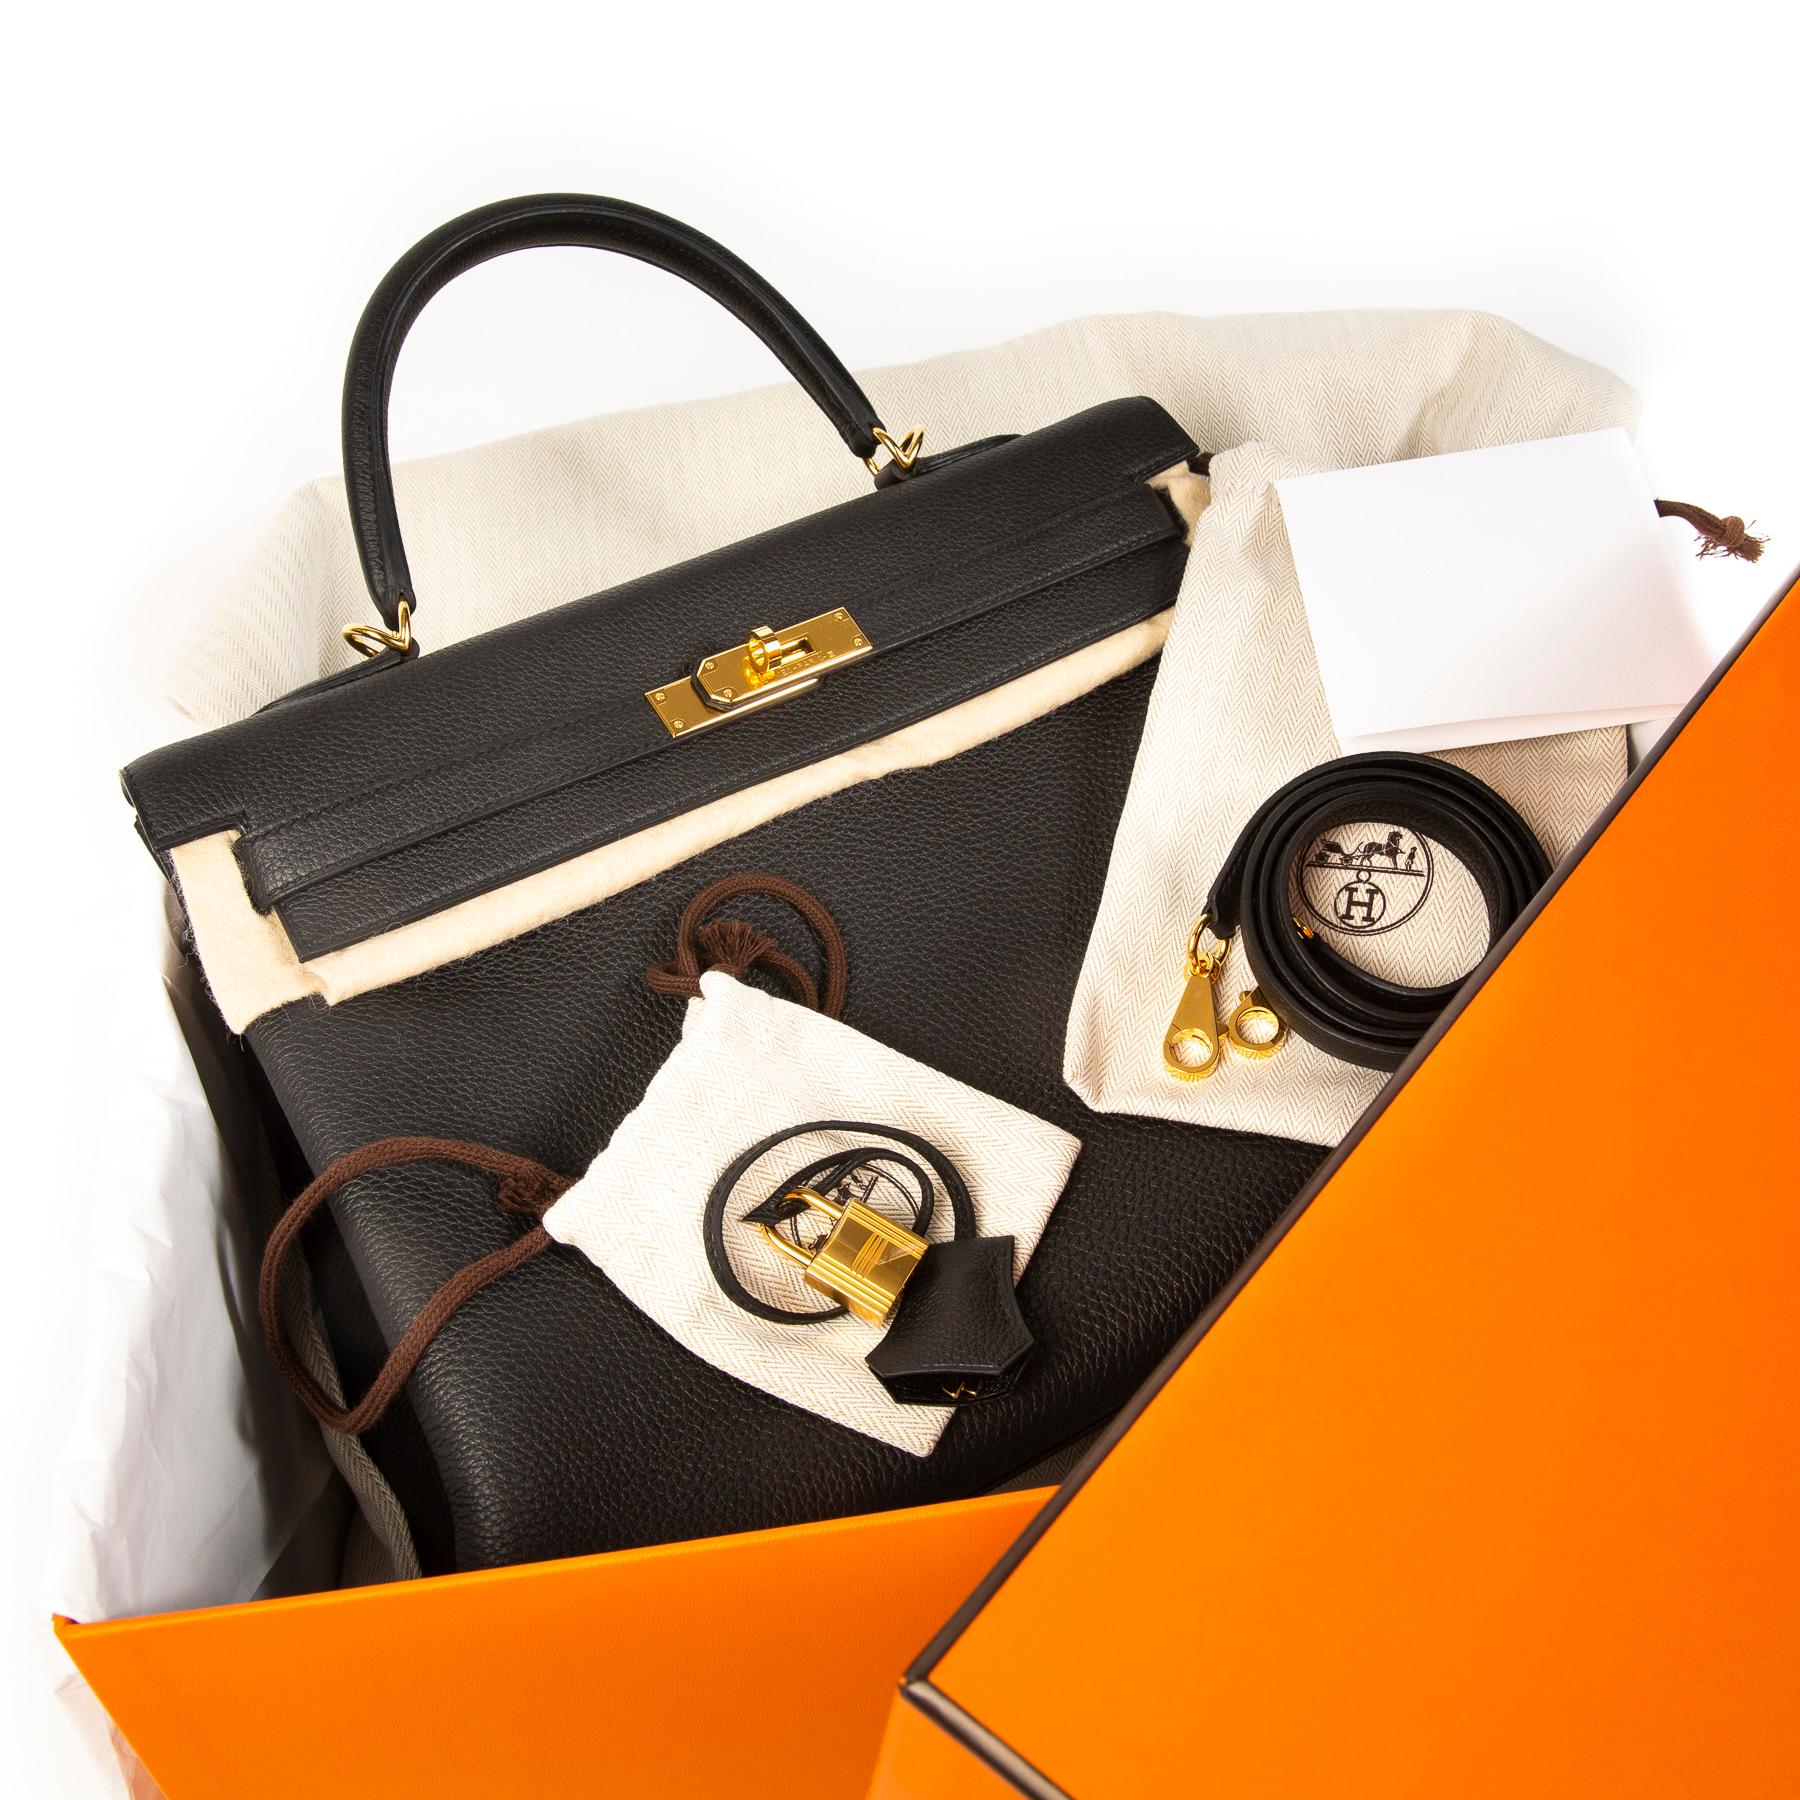 Hermès Kelly 35 Retourne Togo Black GHW
The iconic Hermès Kelly bag is fit for a princess, with its structured lines, beautiful golden details and a vibe of understated luxury.
This gorgeous bag is crafted out of fine Togo leather, a leather which